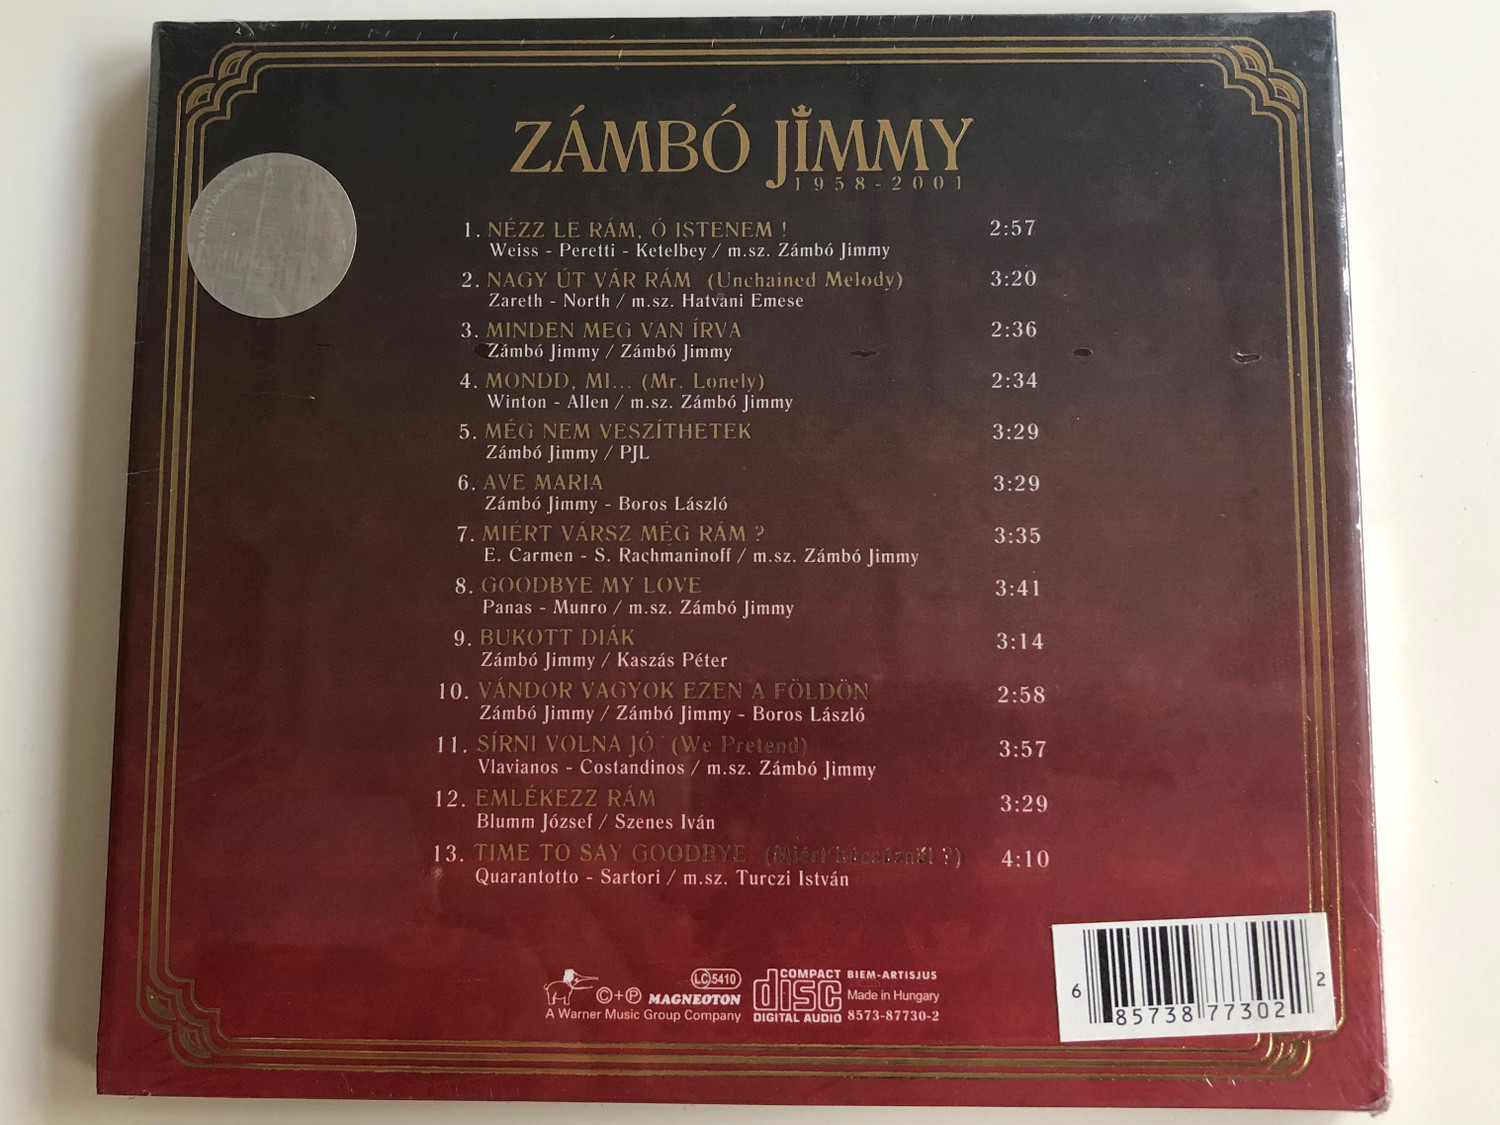 Zámbó Jimmy u200e– 1958-2001 / Magneoton Audio CD / 8573-87730-2 / Hungarian Pop  Star Jimmy Songs Selection - Bible in My Language